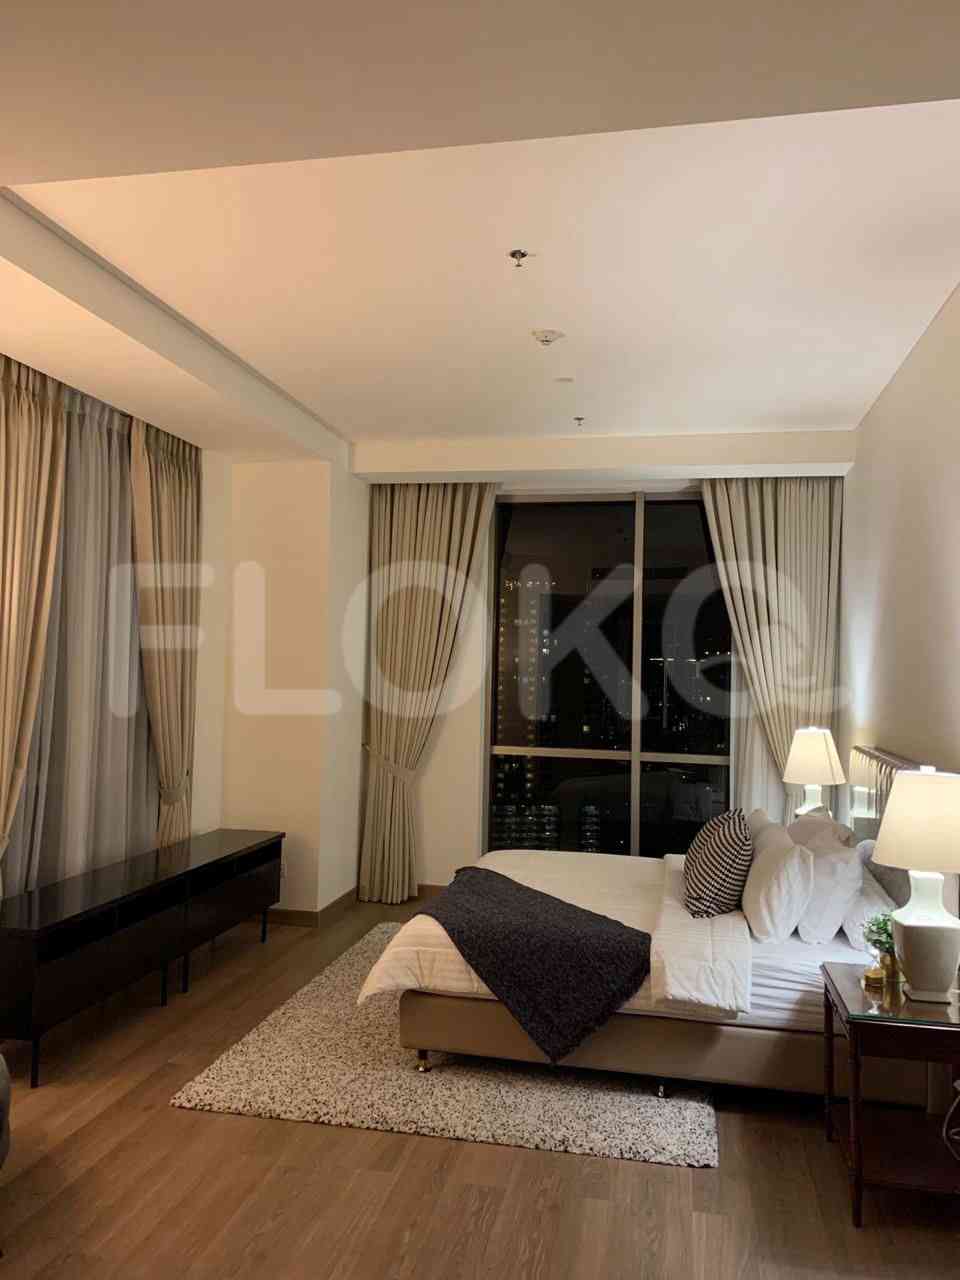 2 Bedroom on 18th Floor for Rent in Pakubuwono Spring Apartment - fga597 4